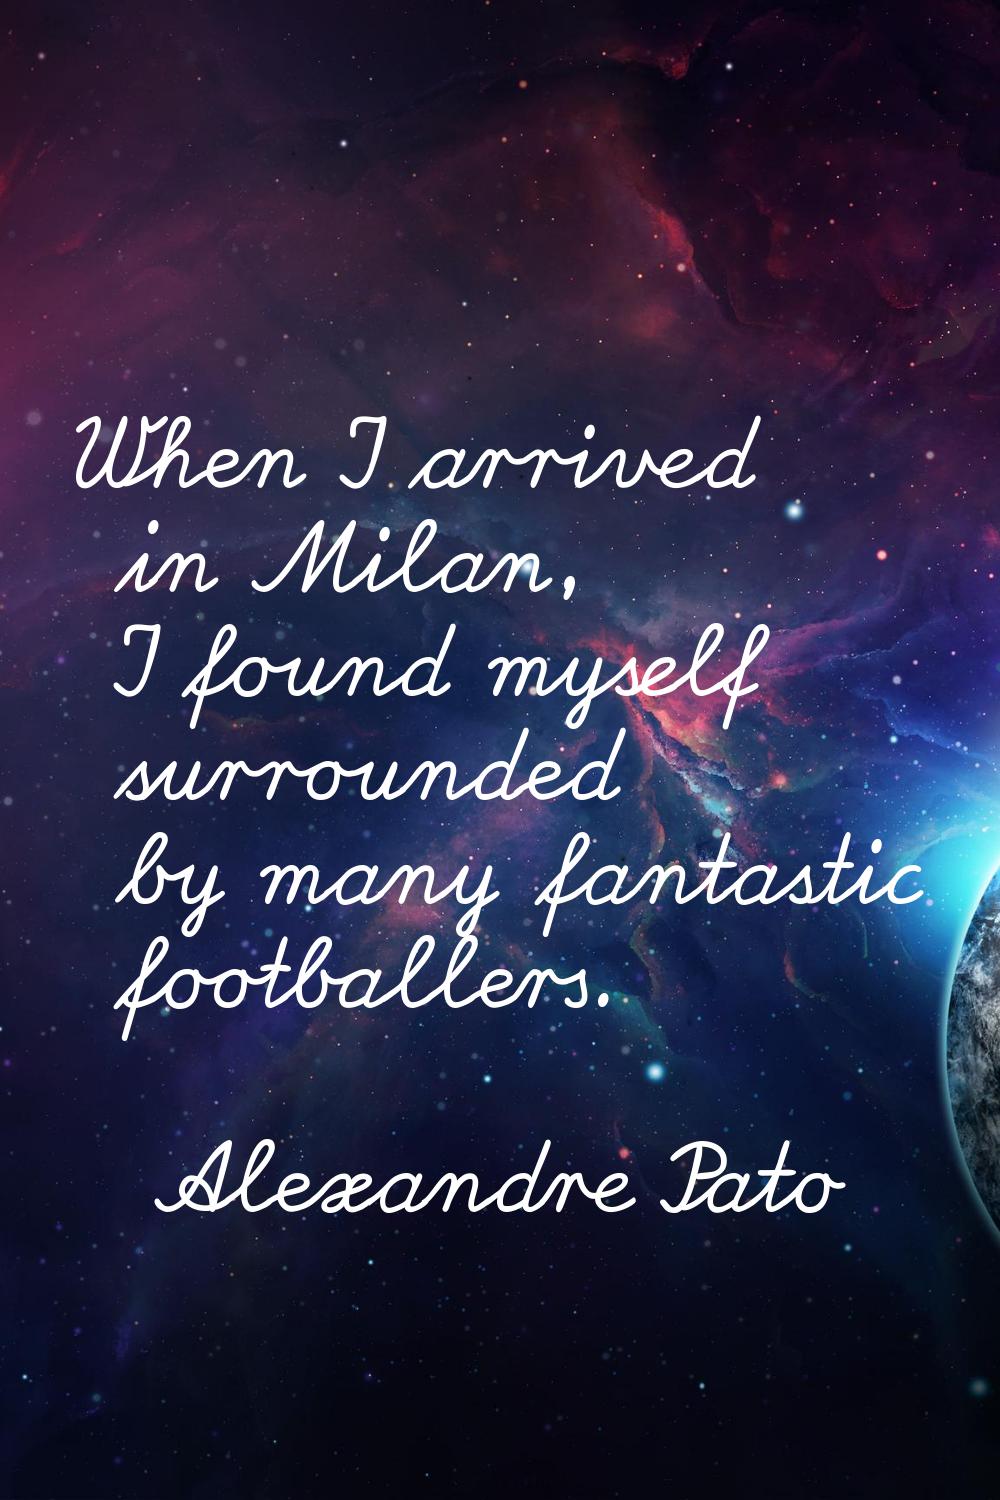 When I arrived in Milan, I found myself surrounded by many fantastic footballers.